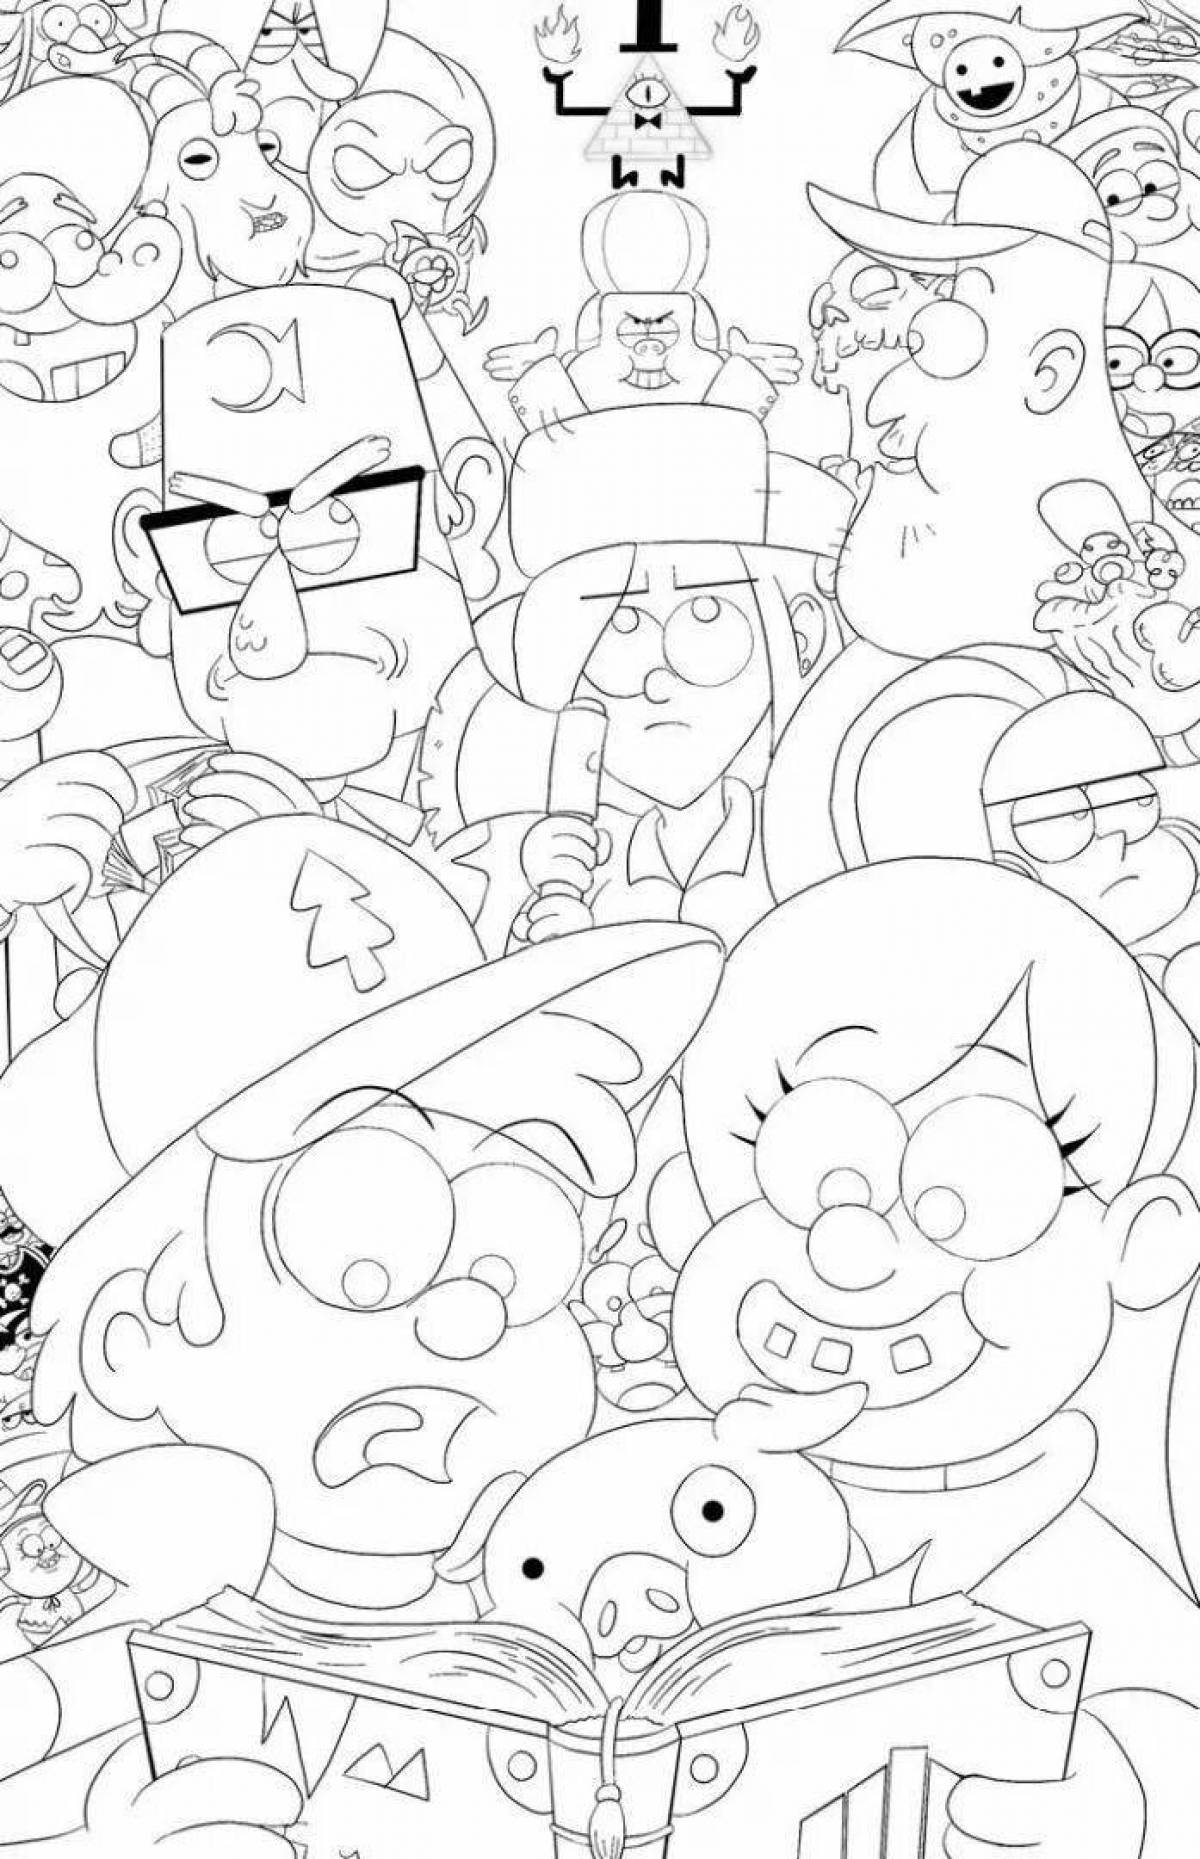 Animated gravity falls everything coloring page